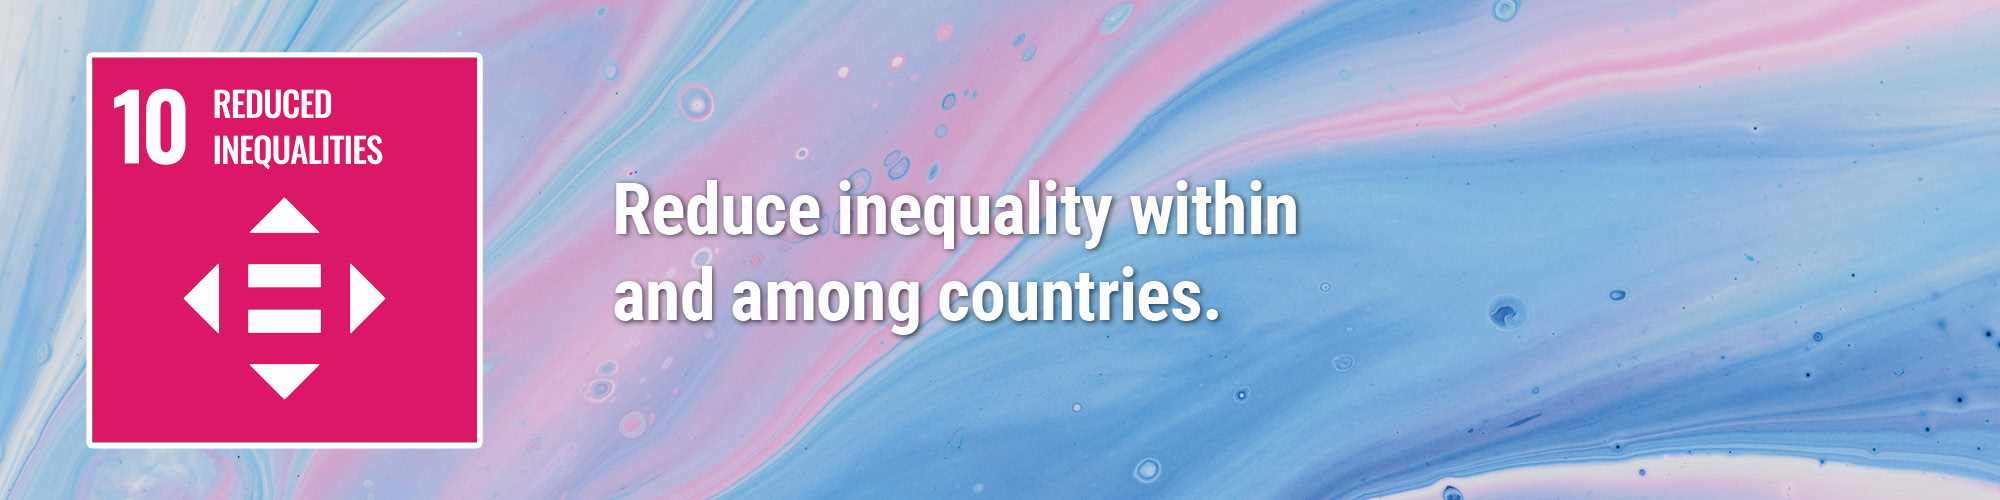 Reduce inequality within and among countries.